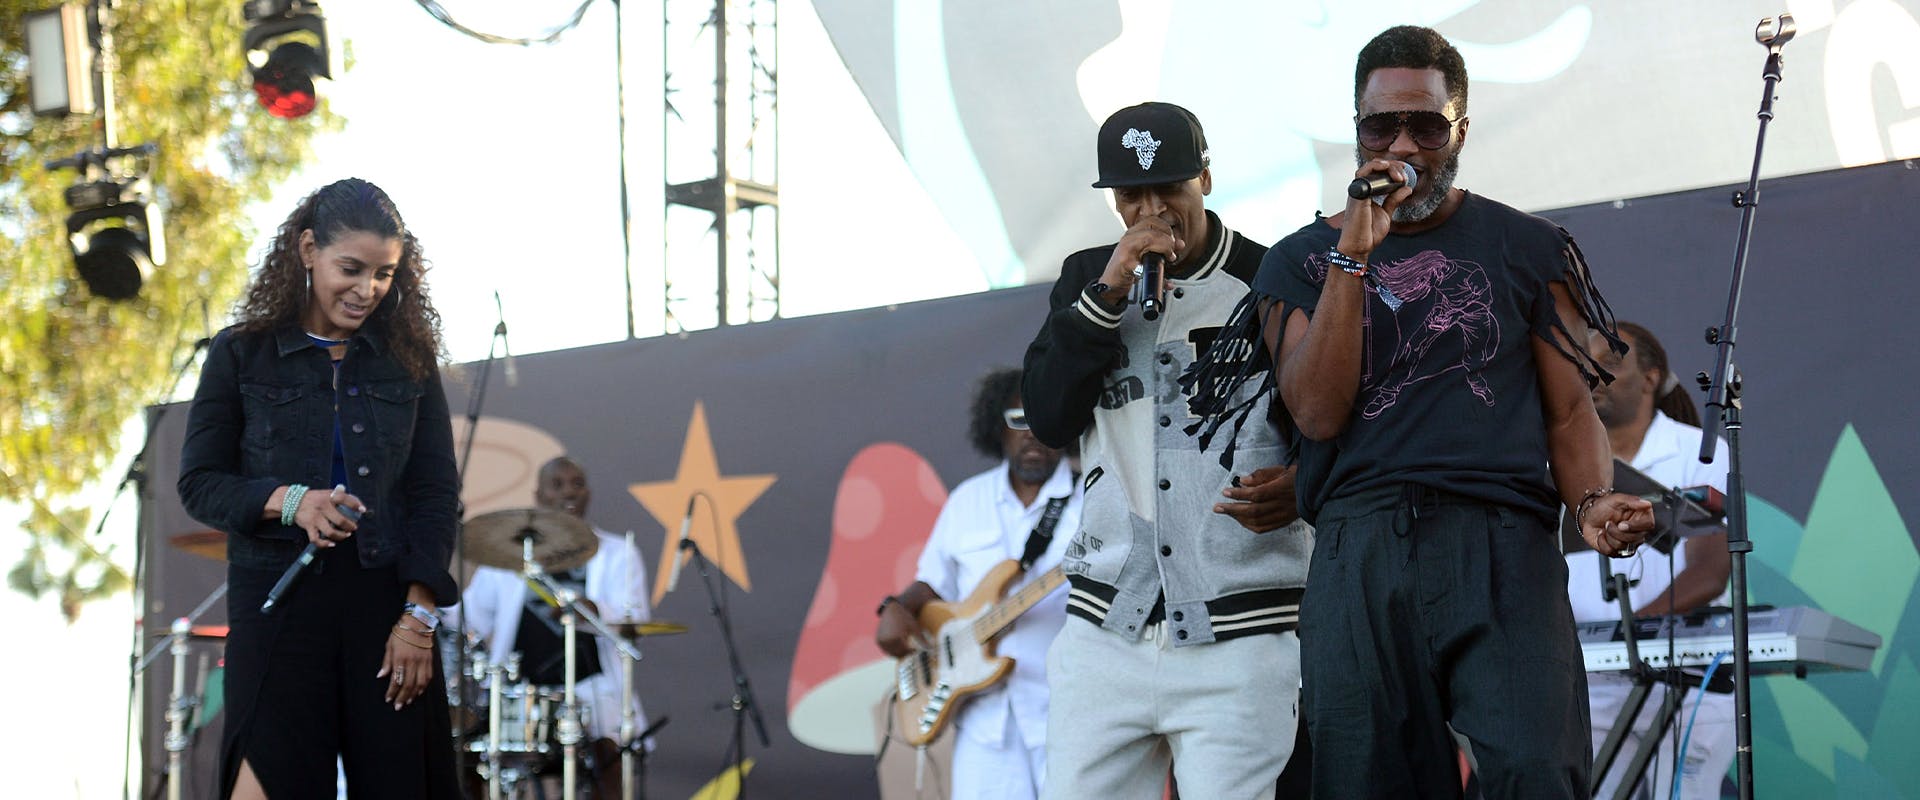 (L-R) Rappers Mary Ann "Lady Bug Mecca" Vieira, Craig "Doodlebug" Irving and Ishmael "Butterfly" Butler of Digable Planets perform onstage during the 2nd annual Music Tastes Good Festival at Marina Green Park on October 1, 2017 in Long Beach, California. (Photo by Scott Dudelson/WireImage)